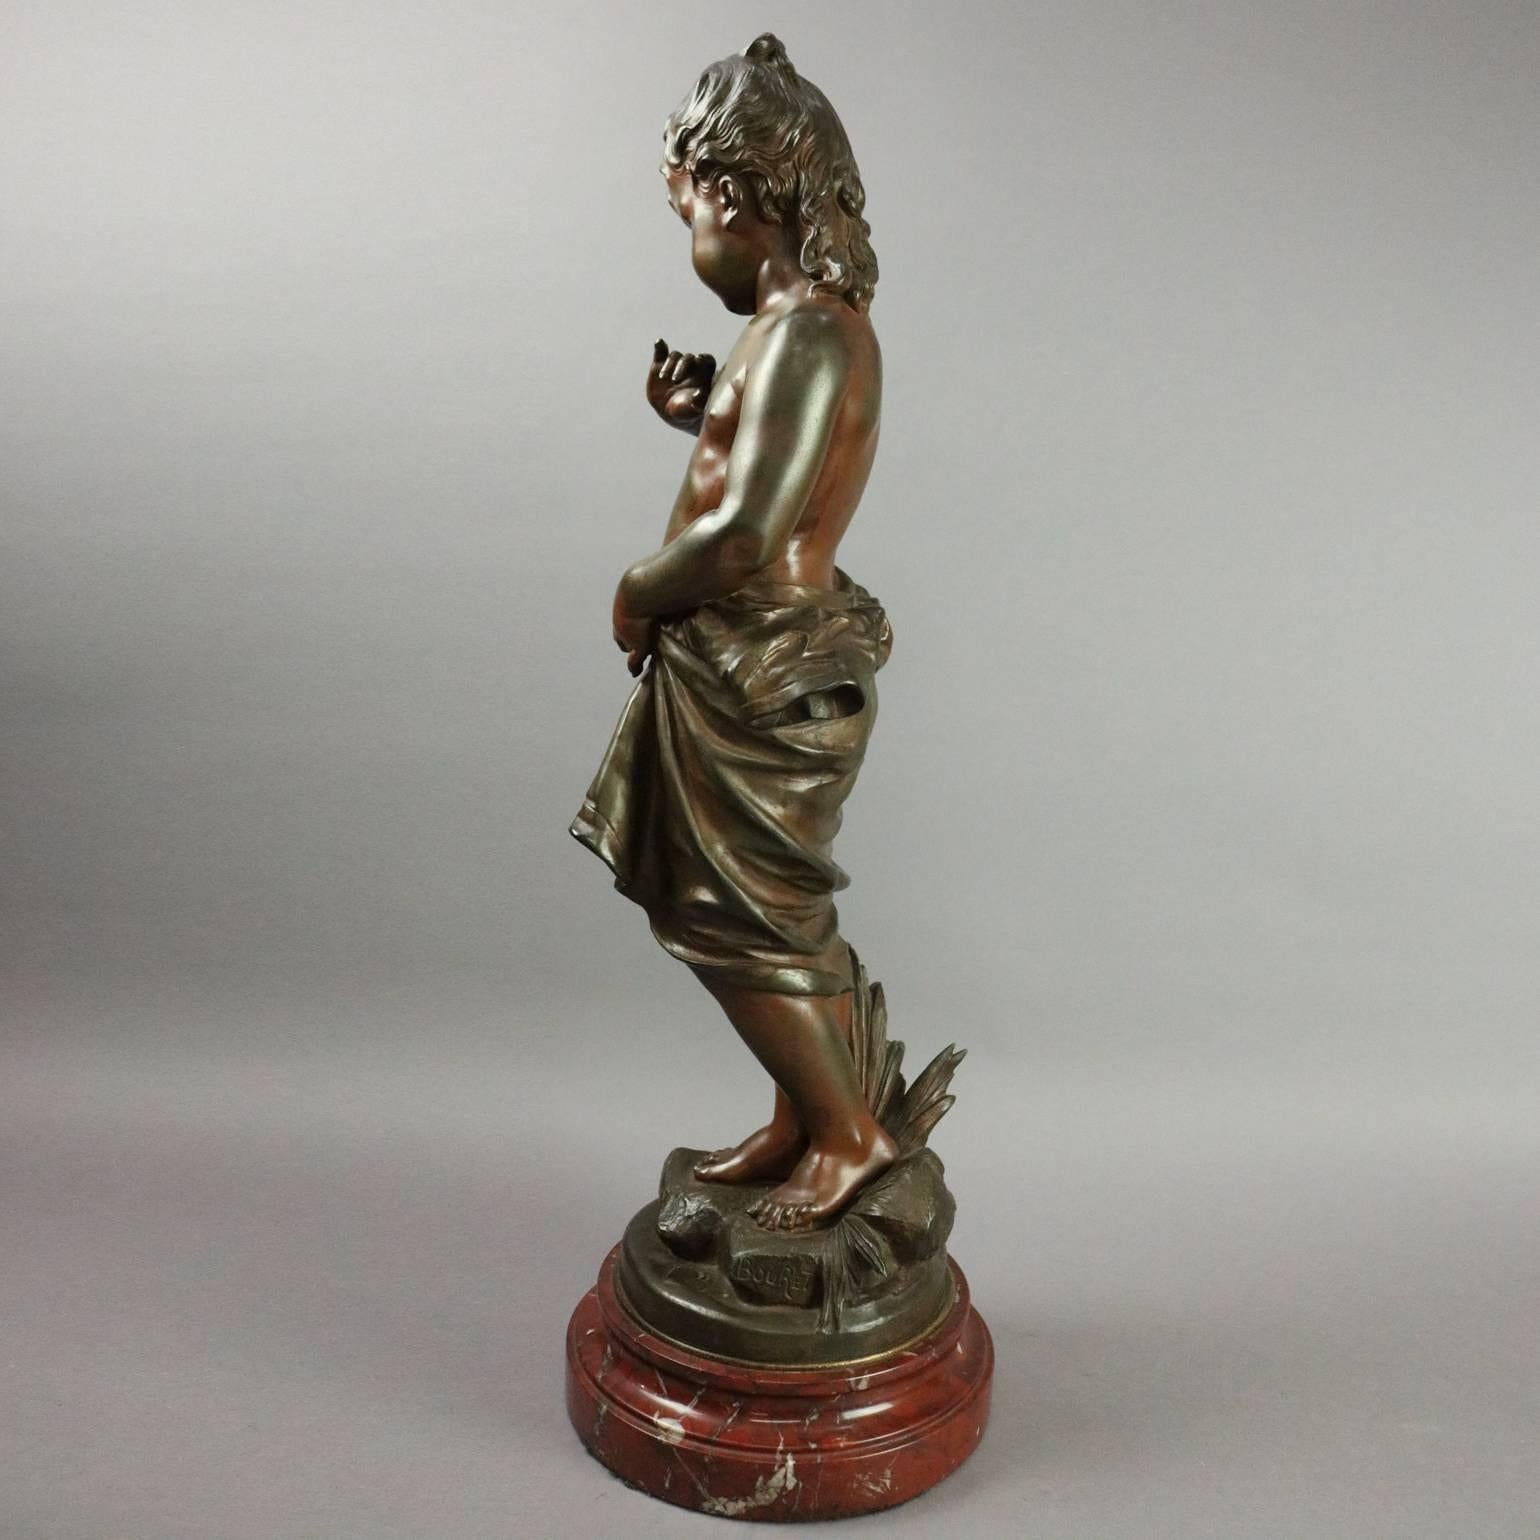 19th Century Antique French Bronzed Metal Sculpture of Young Child Signed Bouret, circa 1880